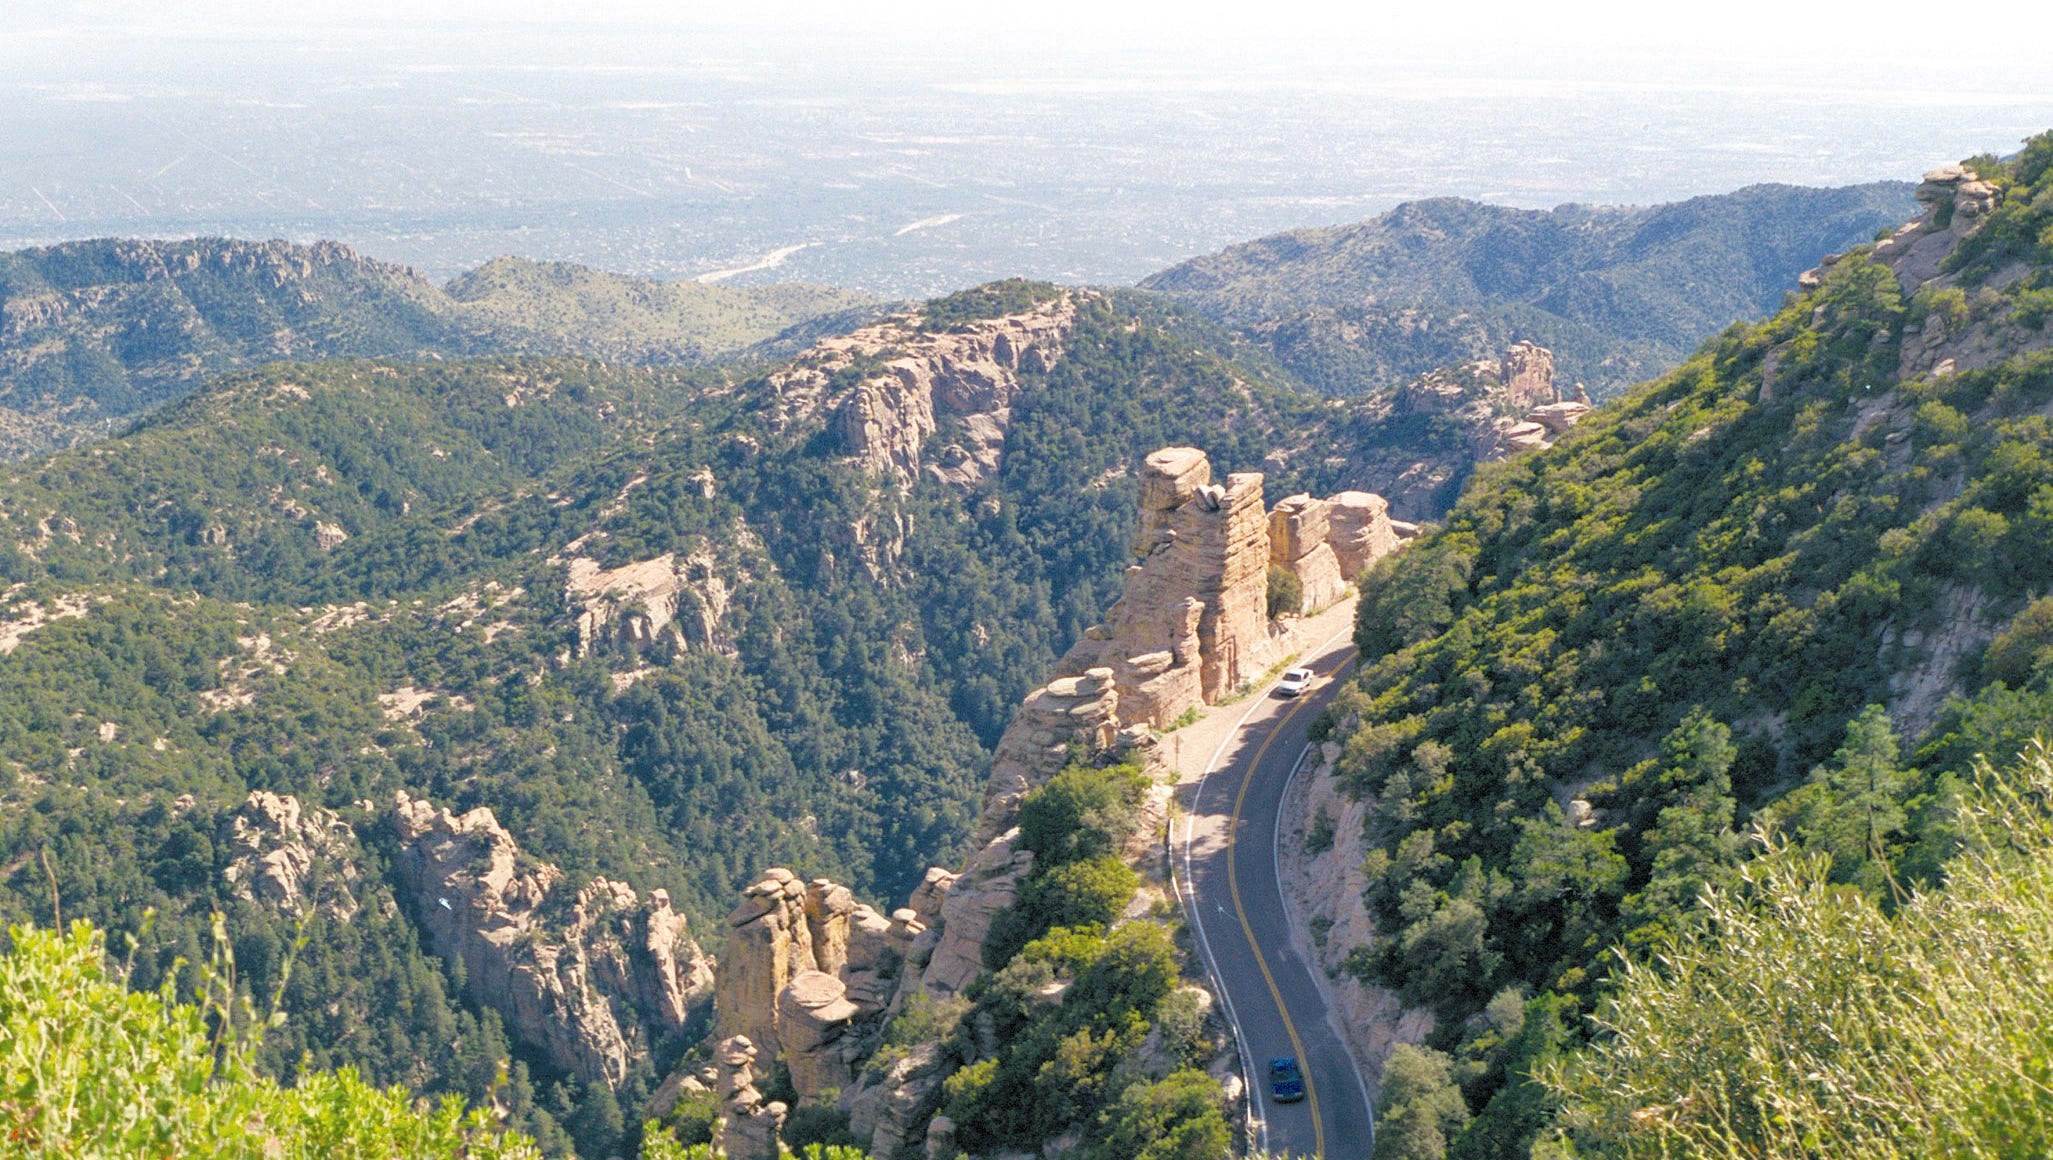 The history behind the name of Arizona's Mount Lemmon